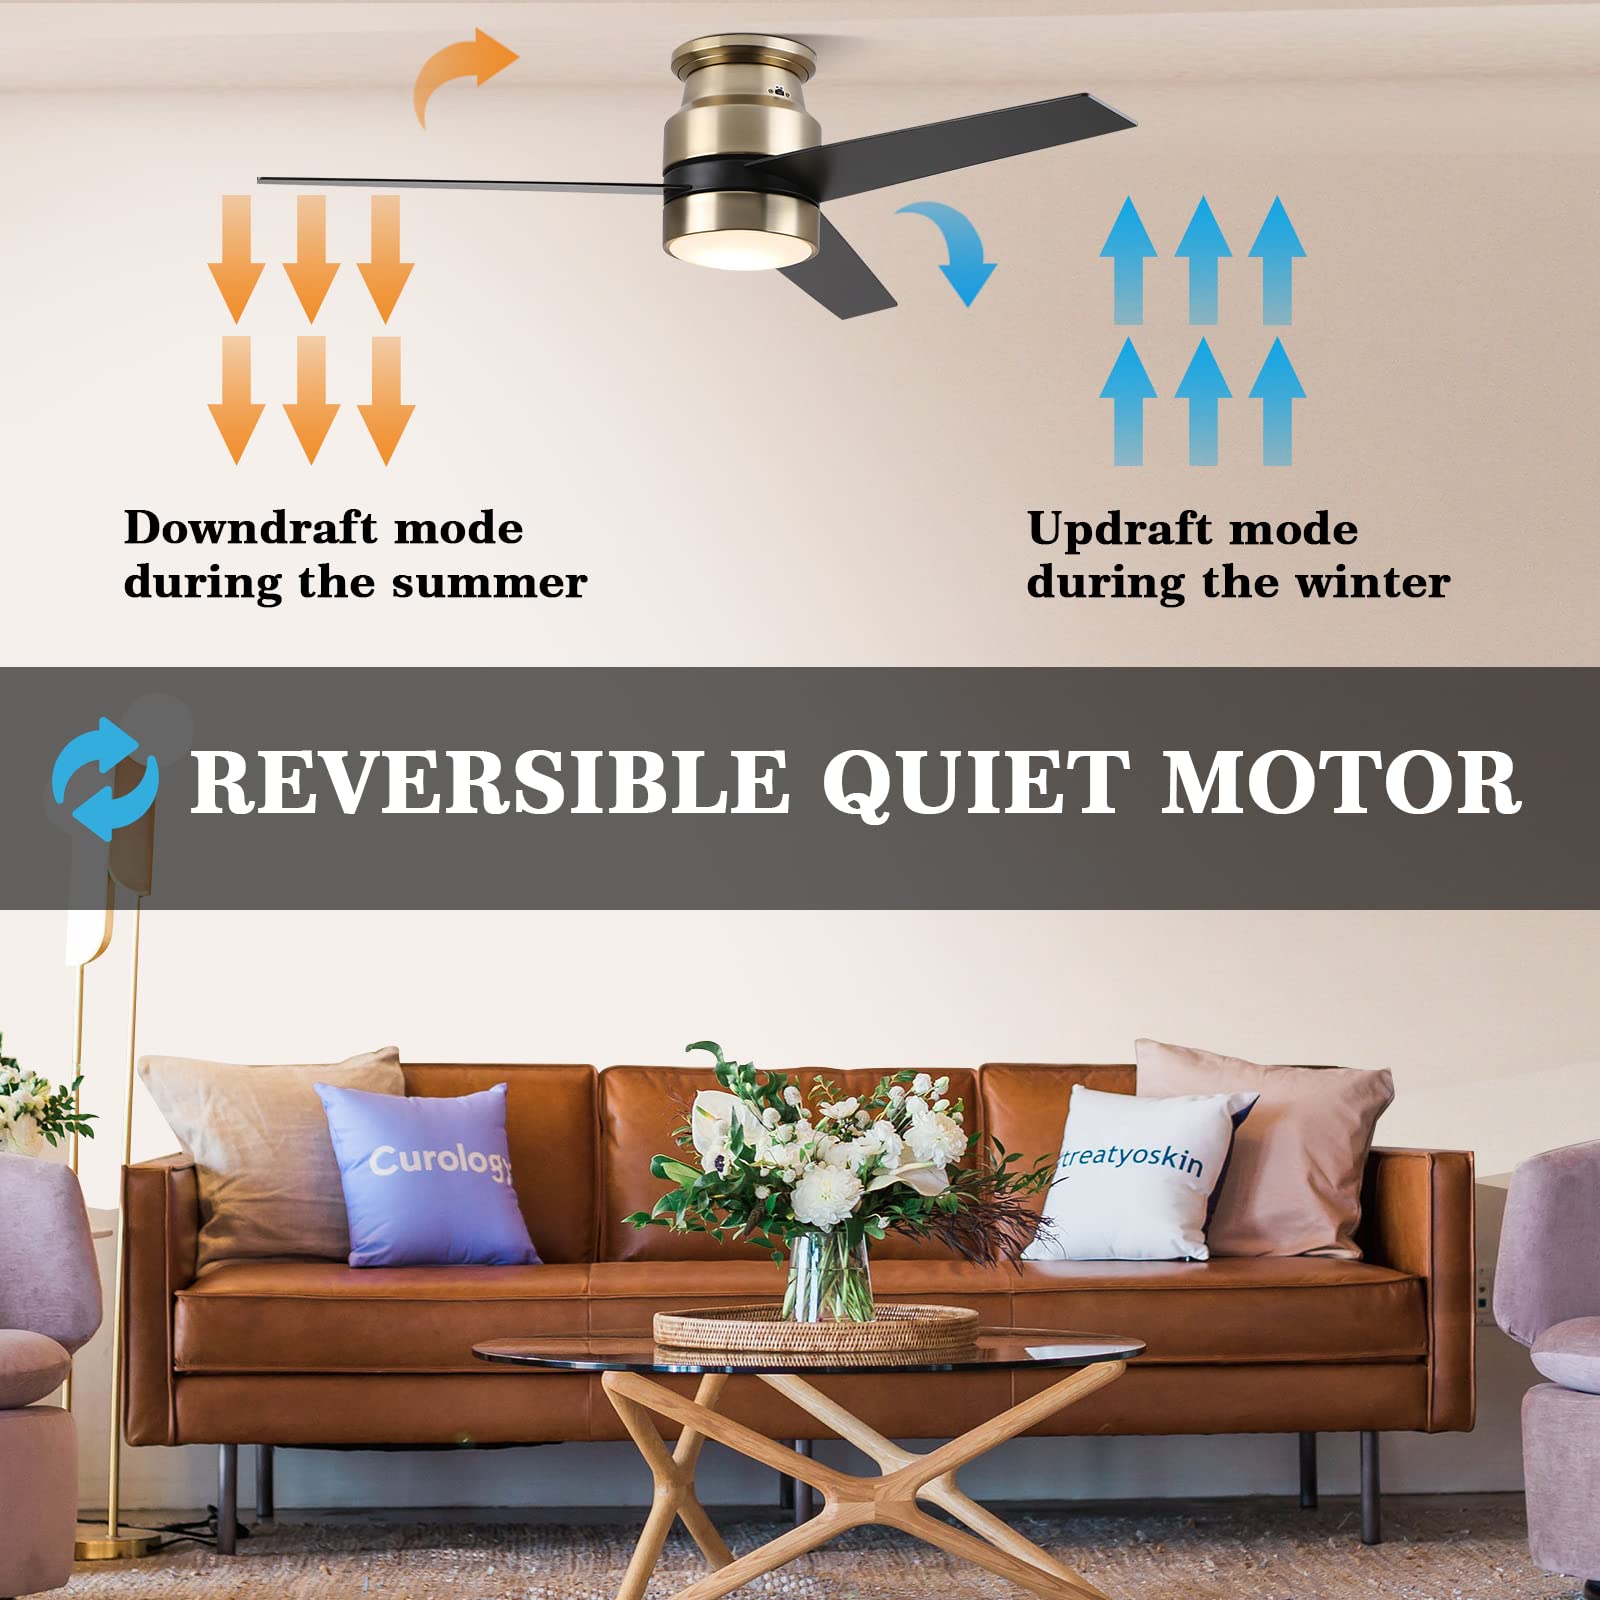 Carro Low Profile Smart Ceiling Fan with Light, Work With Alexa/Google Home/Siri|Reversible Motor|Schedule| Needs Neutral Wire, No Hub Required, 52 inch